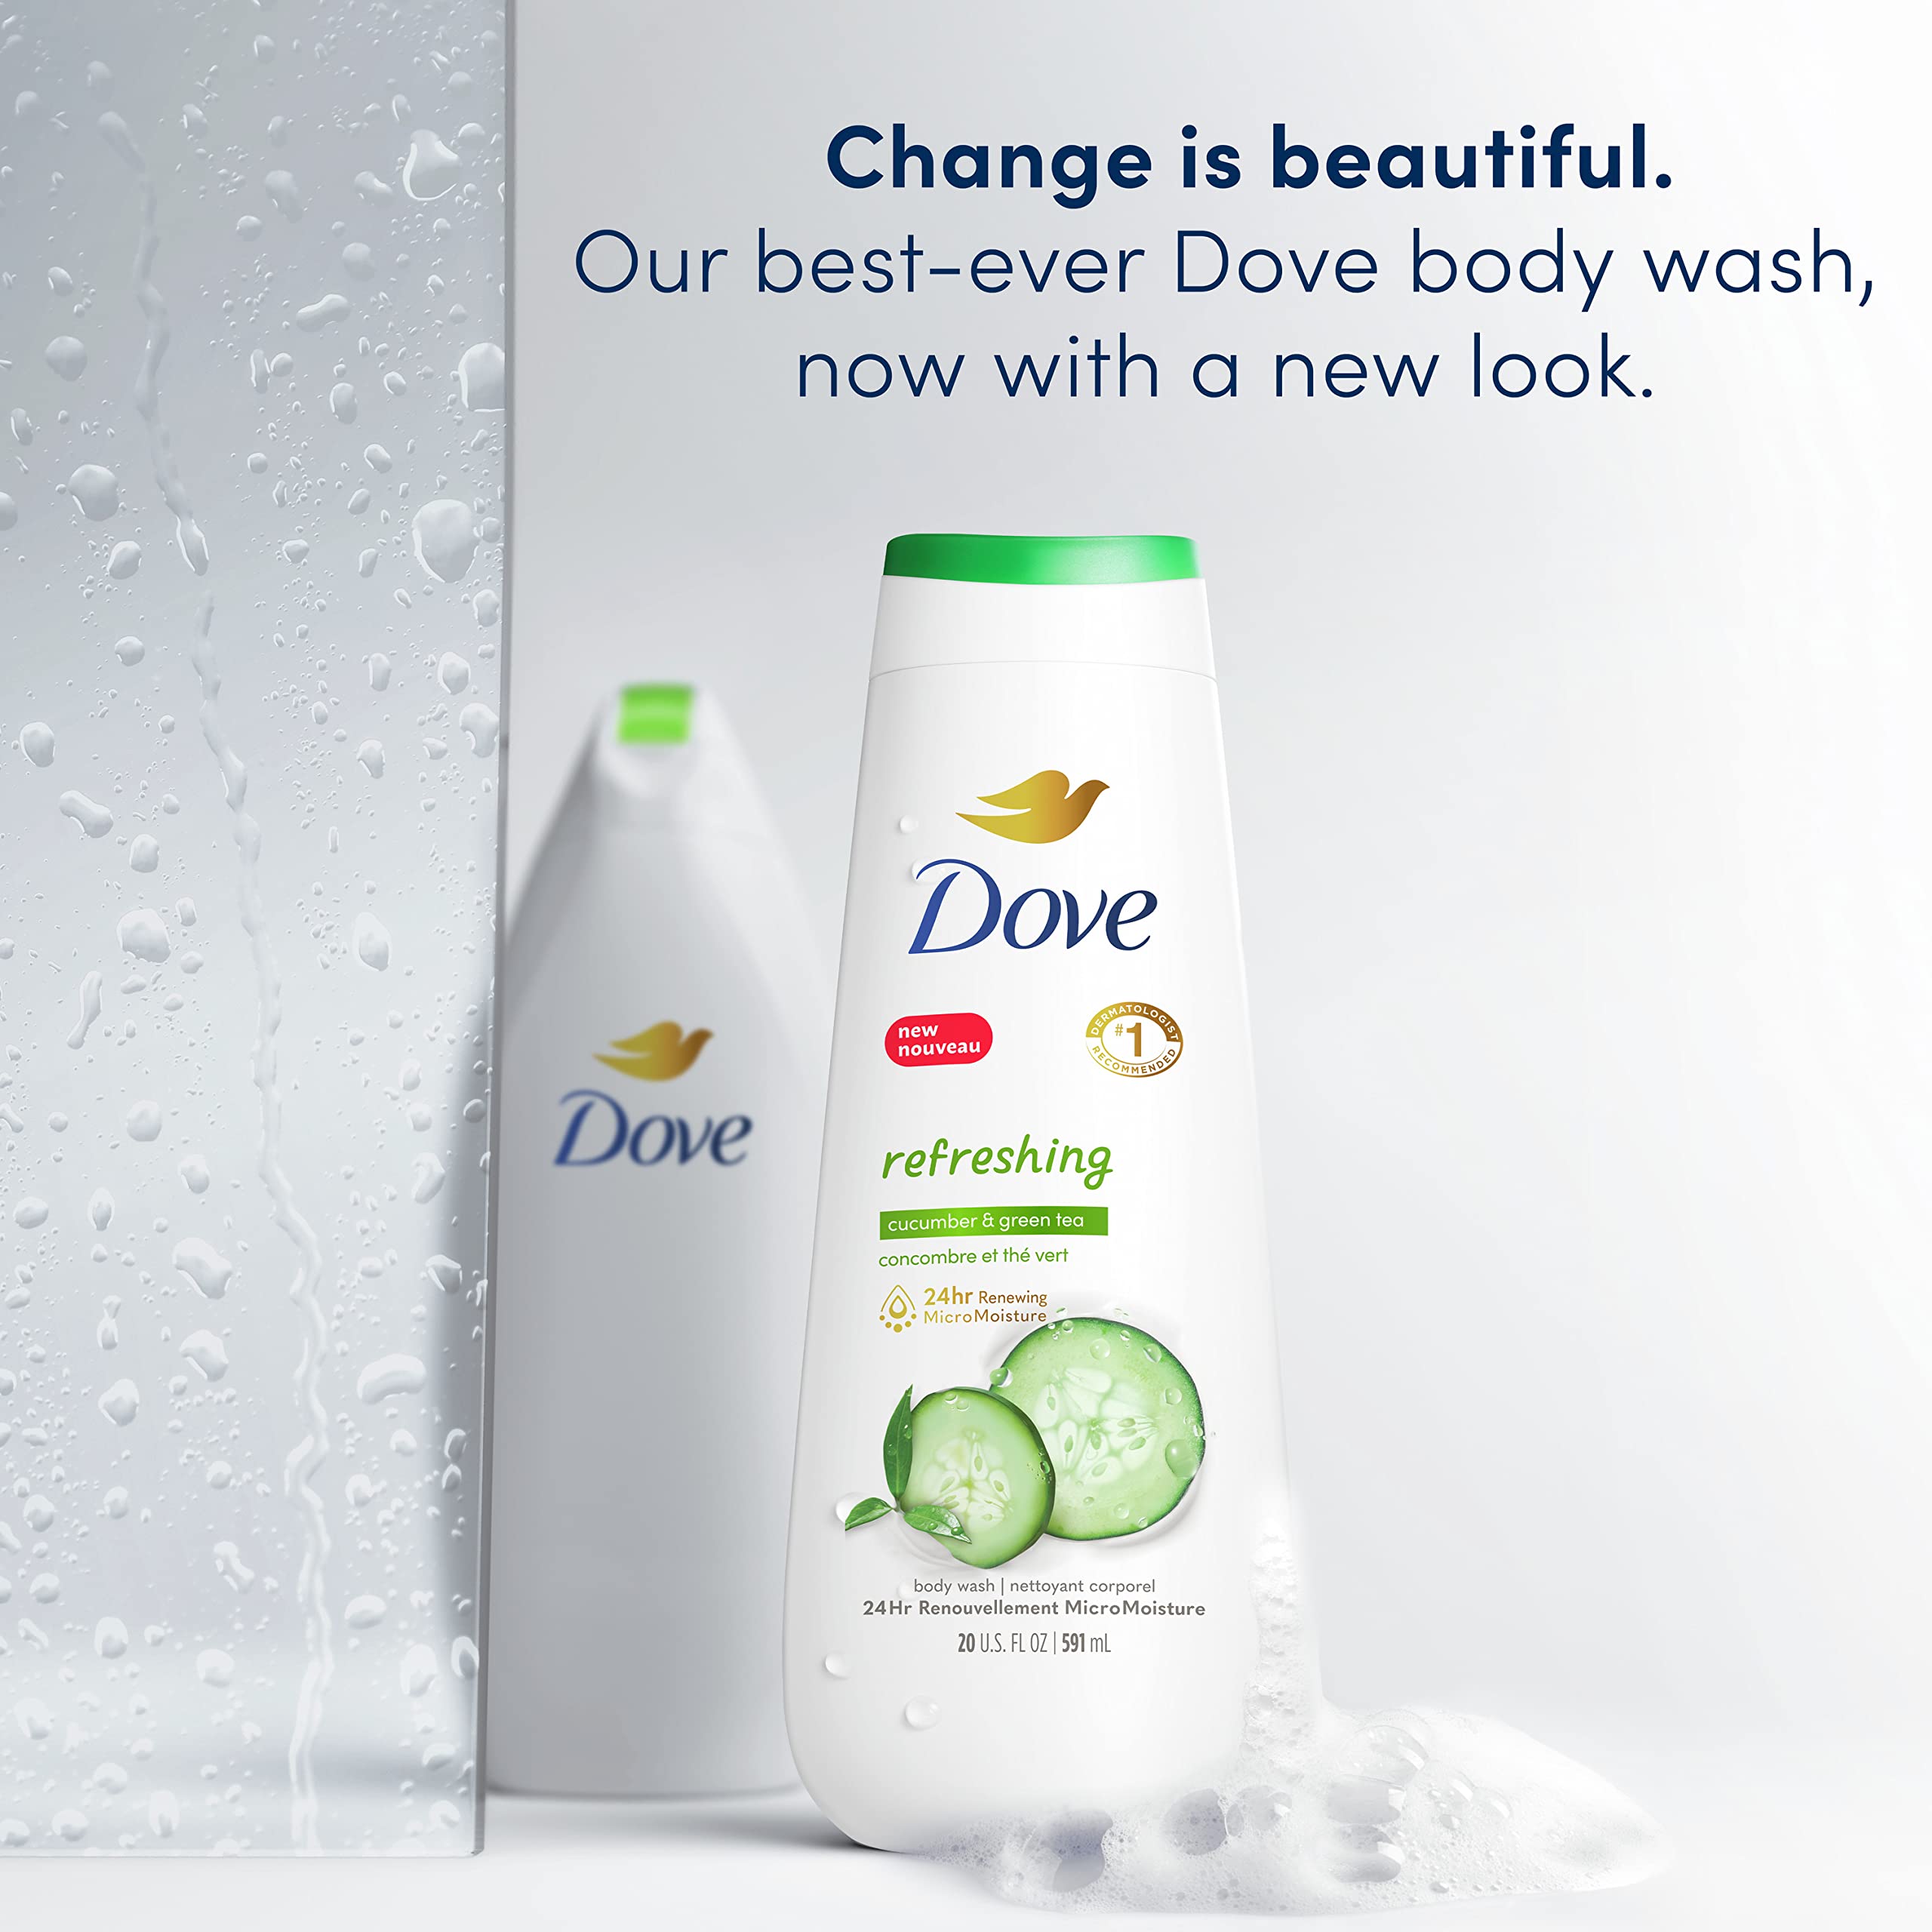 Dove Body Wash Refreshing Cucumber and Green Tea 4 Count Refreshes Skin Cleanser That Effectively Washes Away Bacteria While Nourishing Your Skin 20 oz